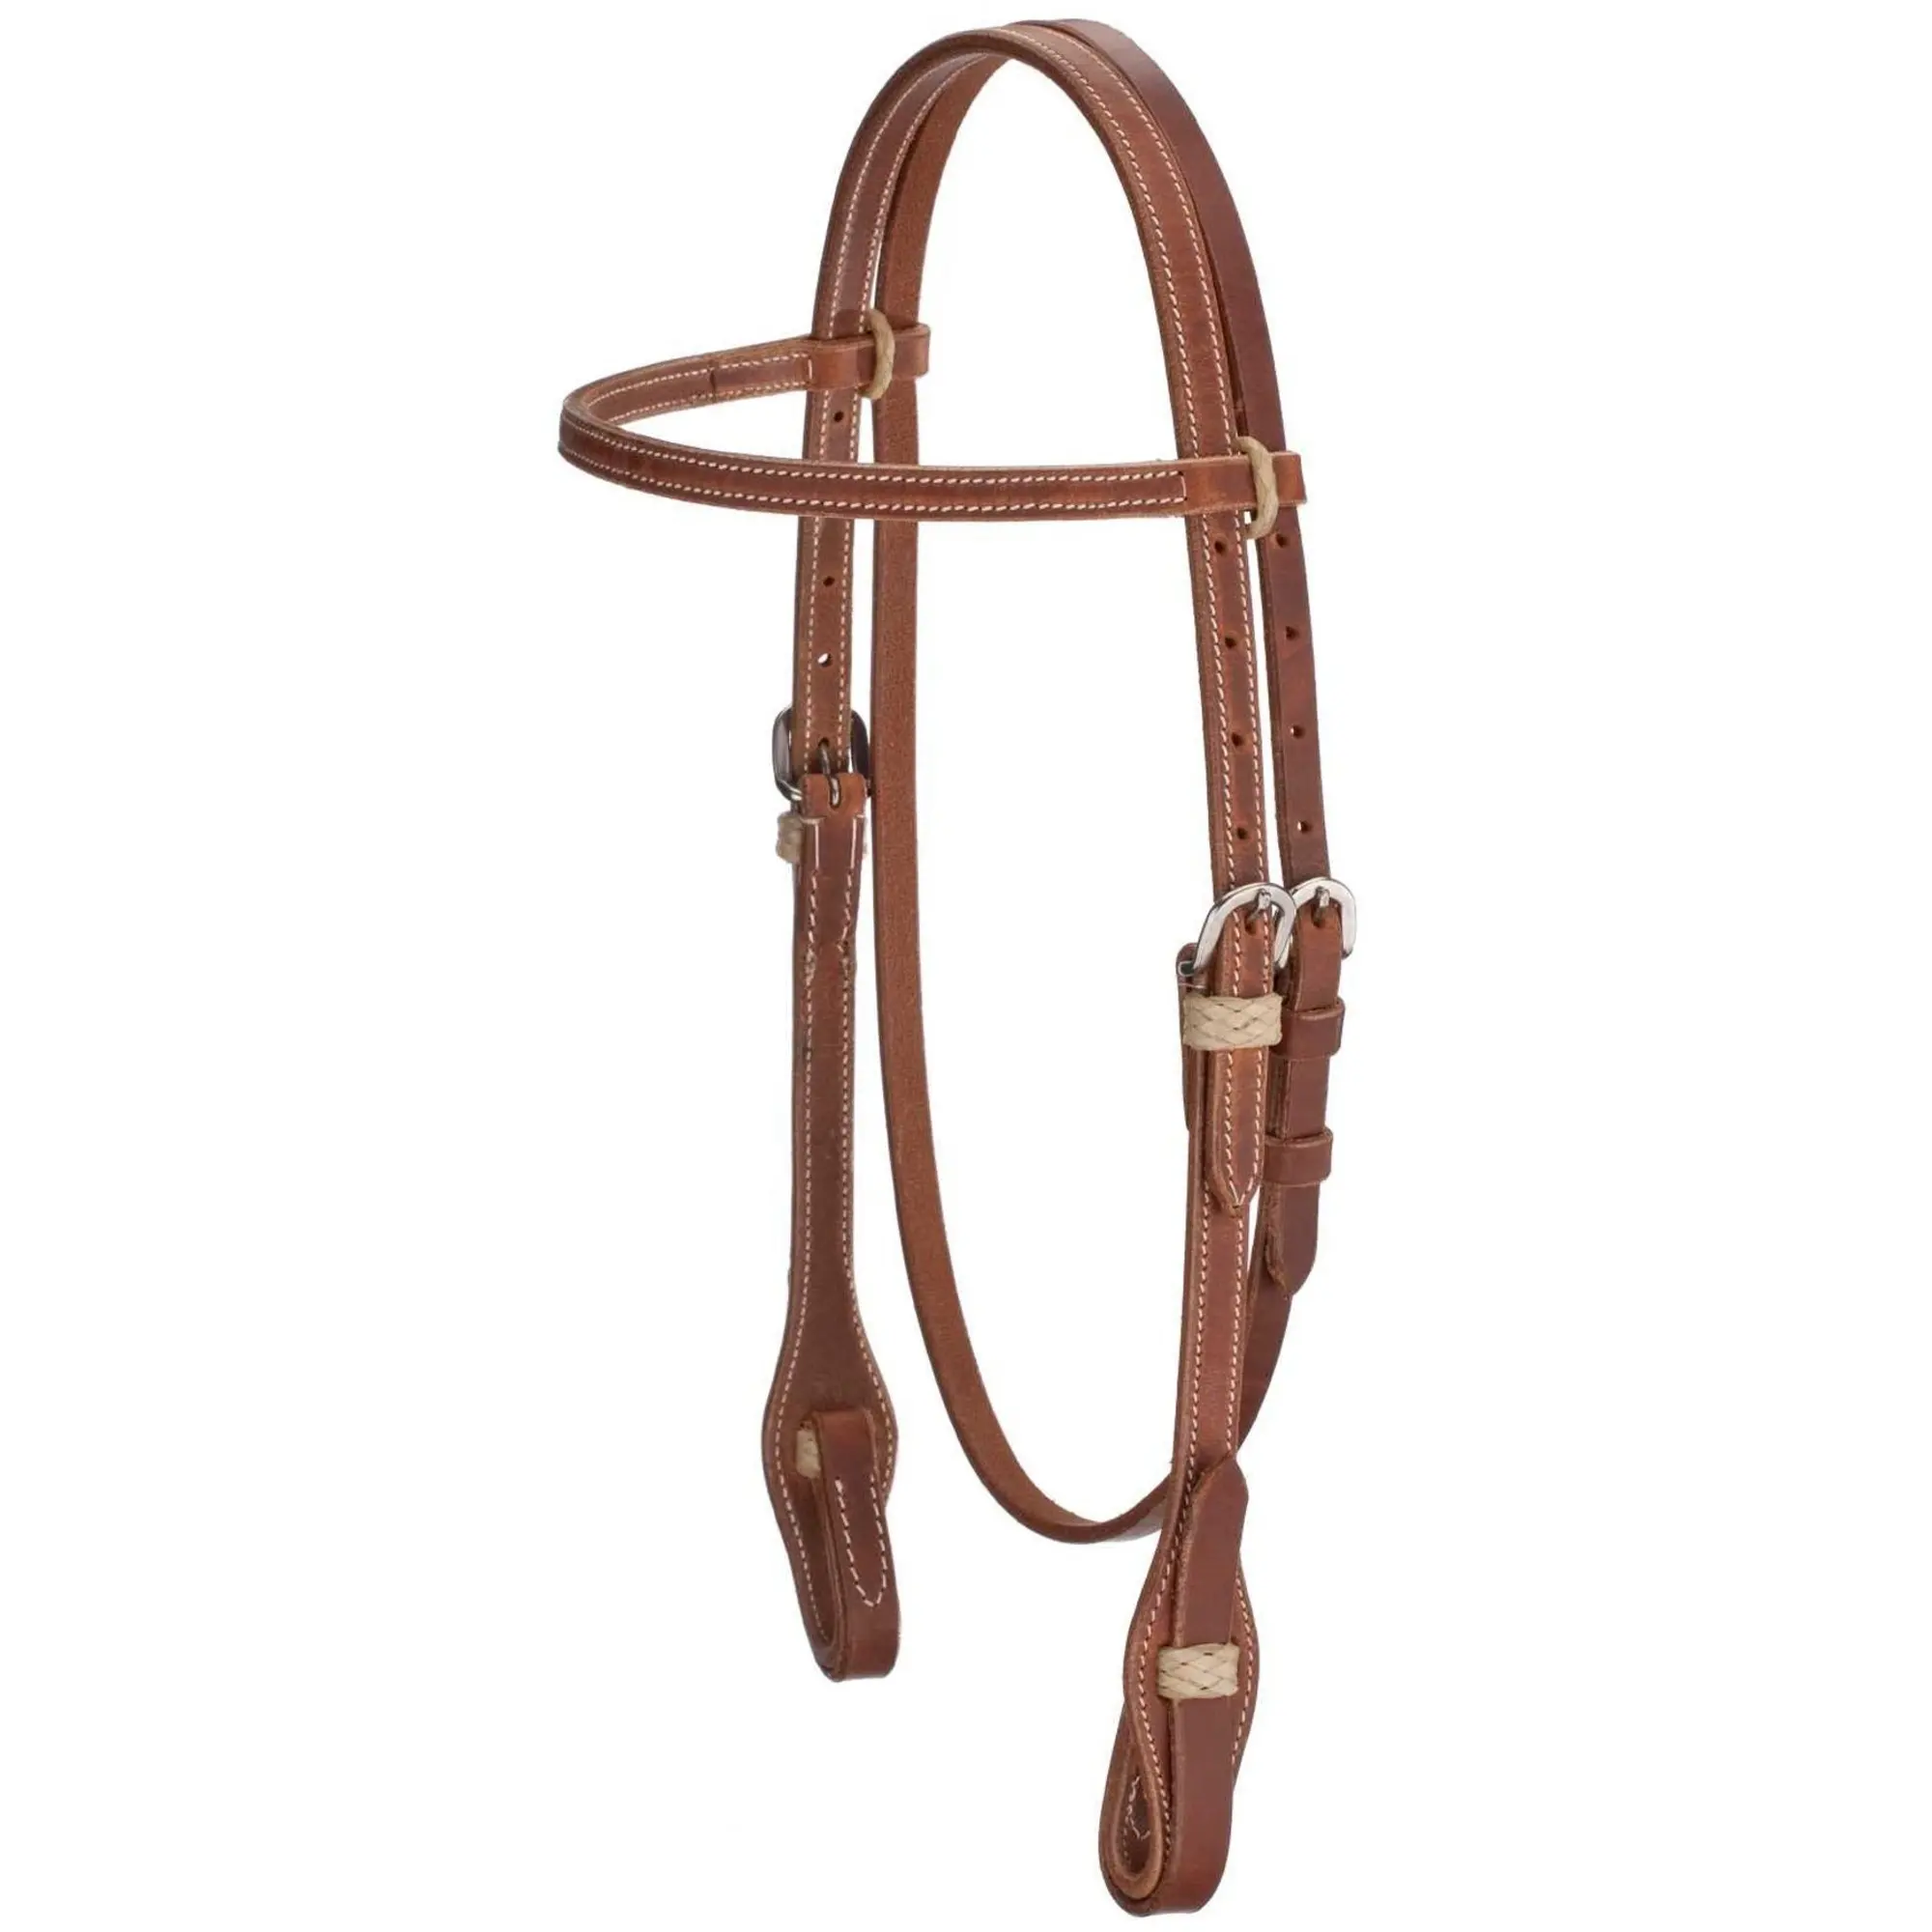 Western Horse Bridle / Heads tall - Straight Brow-Band-Argentin ische Premium Buttered Latigo Leather Heads tall